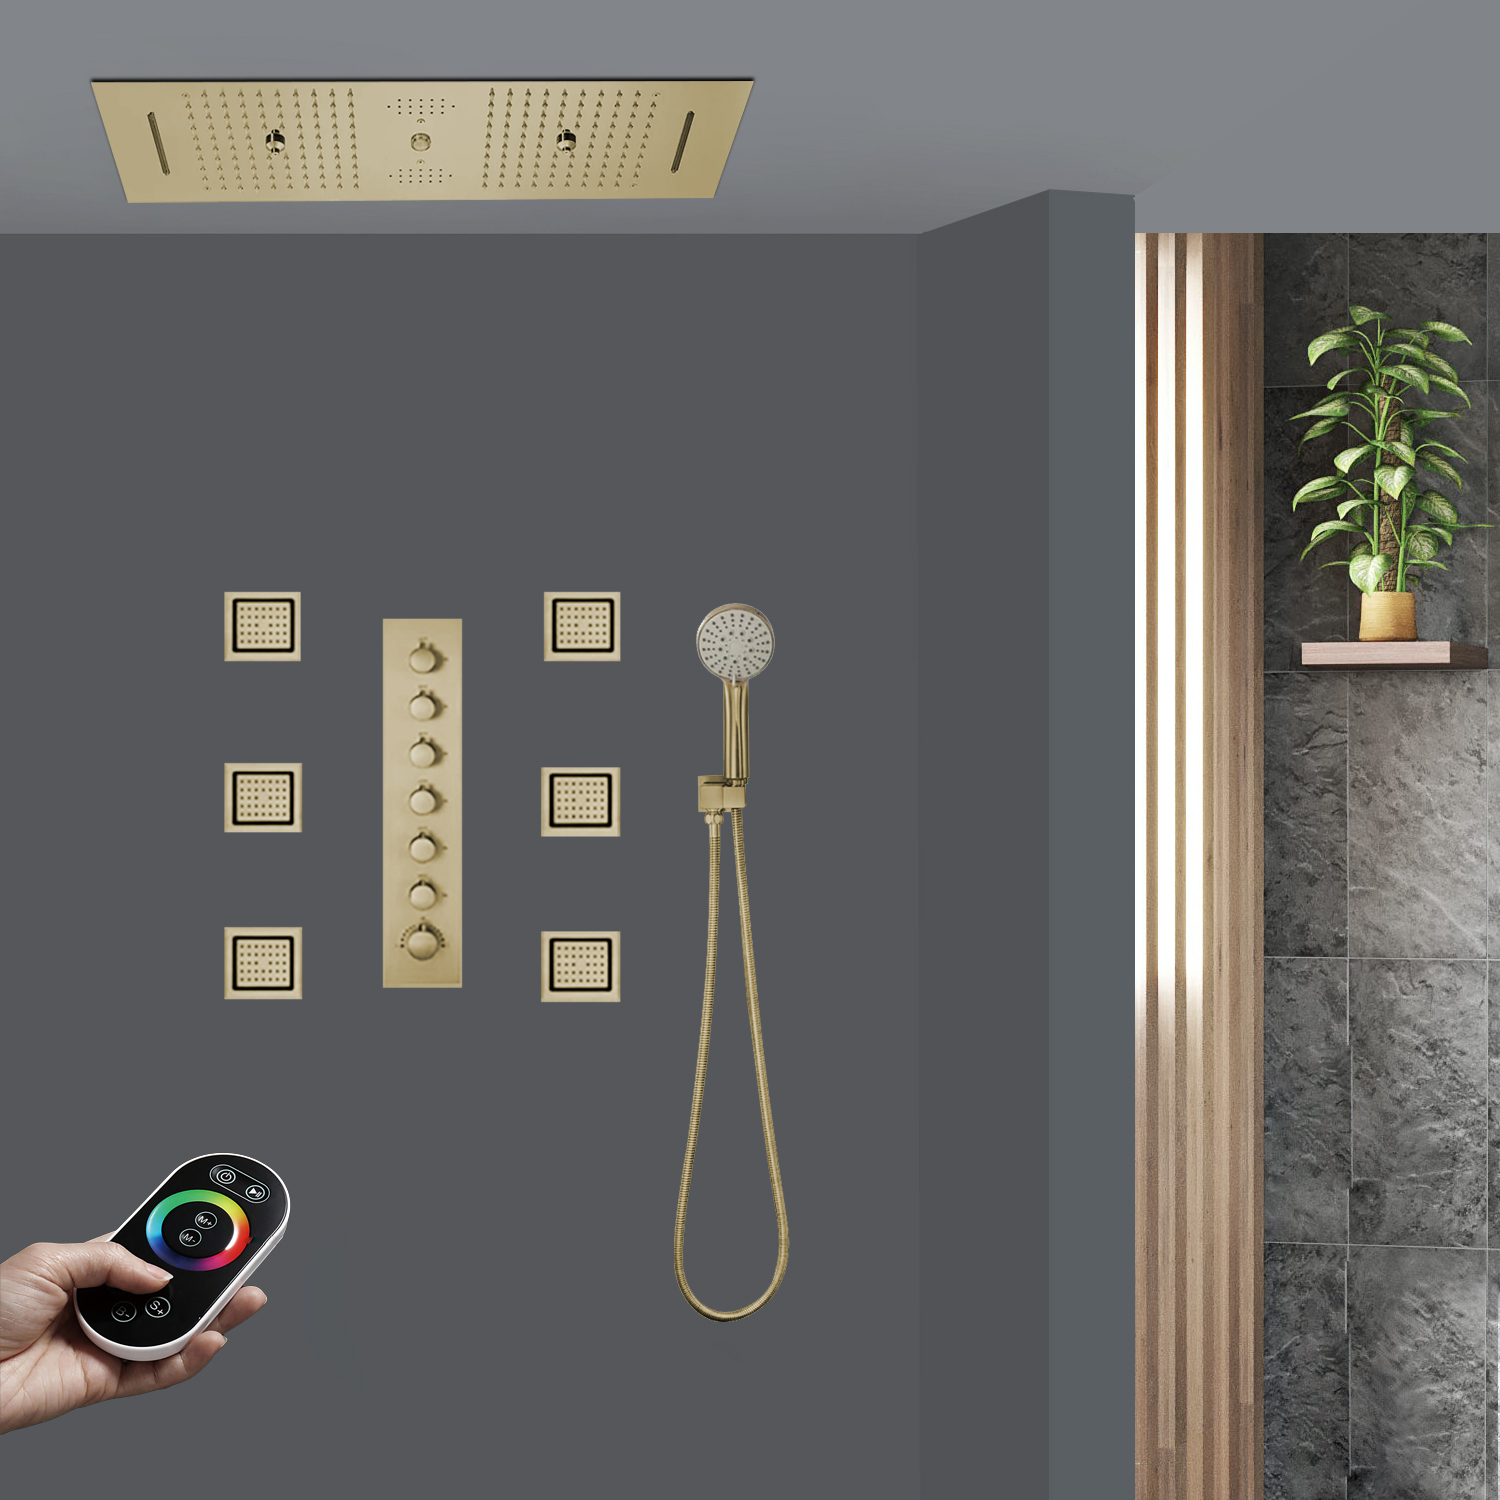 Fontana Dijon Brushed Gold Phone Controlled Thermostatic LED Ceiling Mount Rainfall Water Column Mist Shower System with Square Hand Shower and 6 Jetted Body Sprays